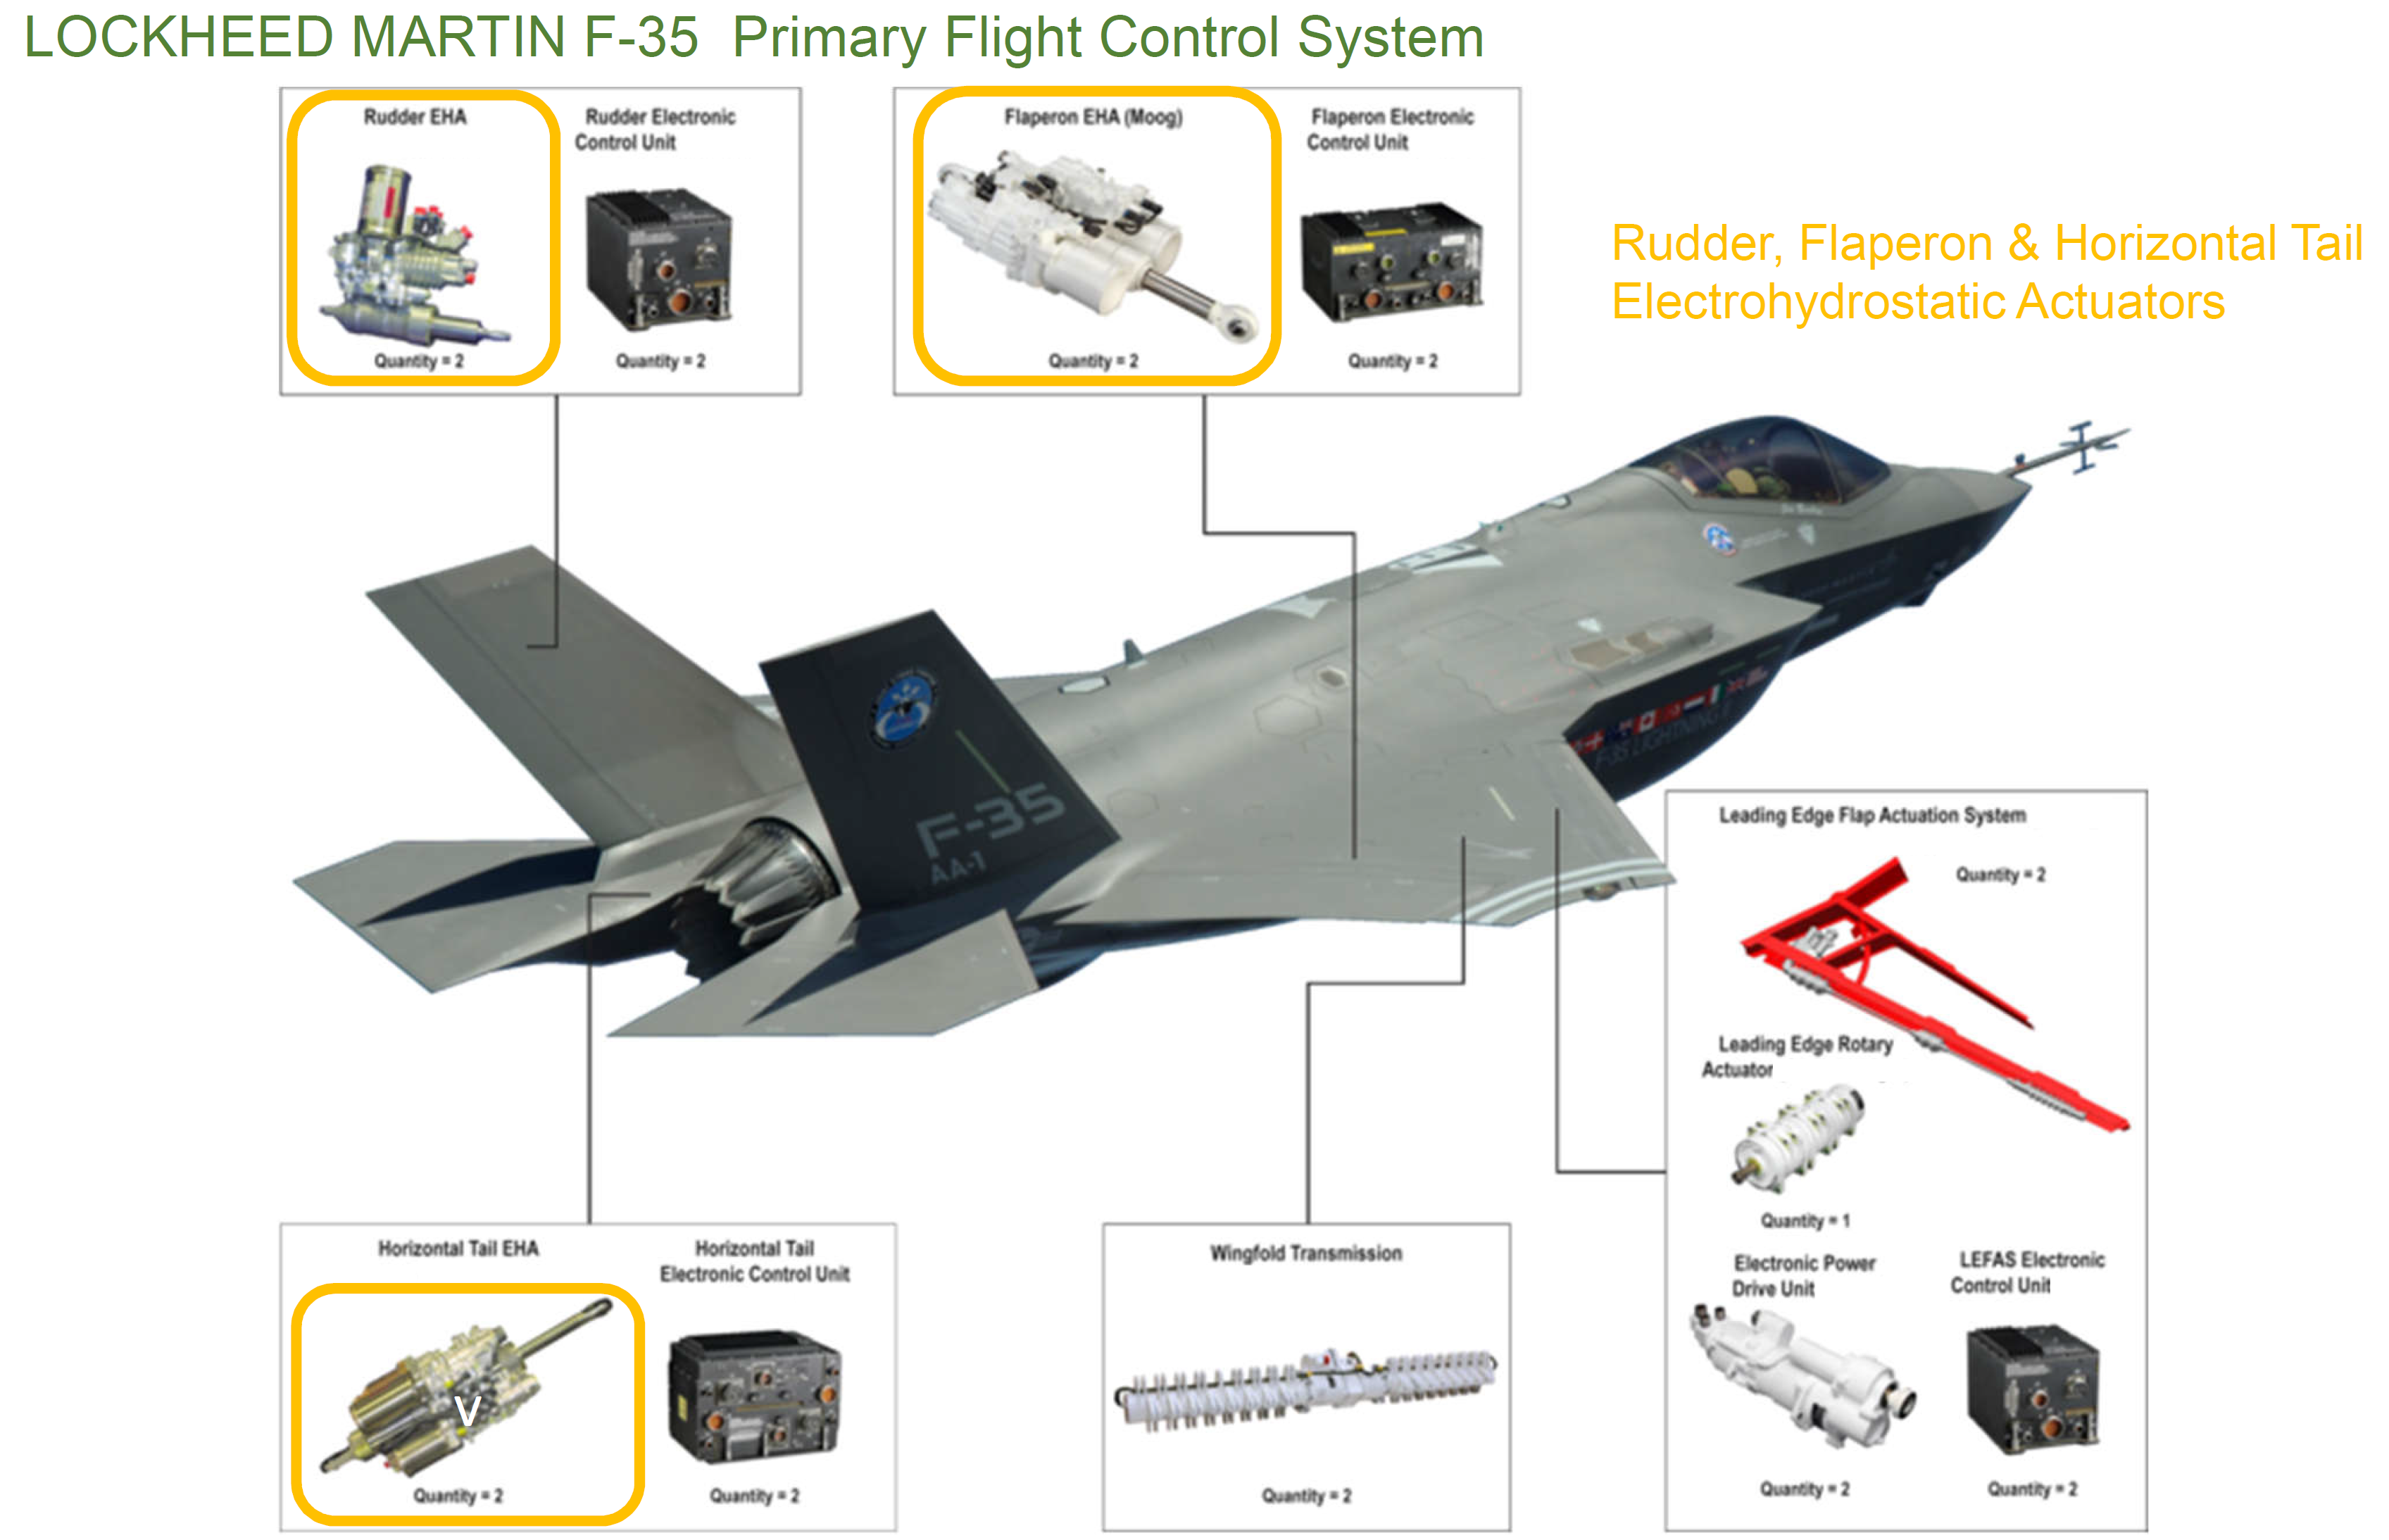 Actuation components of the primary flight control system of the F-35 multirole combat aircraft. The aircraft’s rudder, flaperon and horizontal tail are powered by electrohydrostatic actuators. Source: Moog (Click image to enlarge)